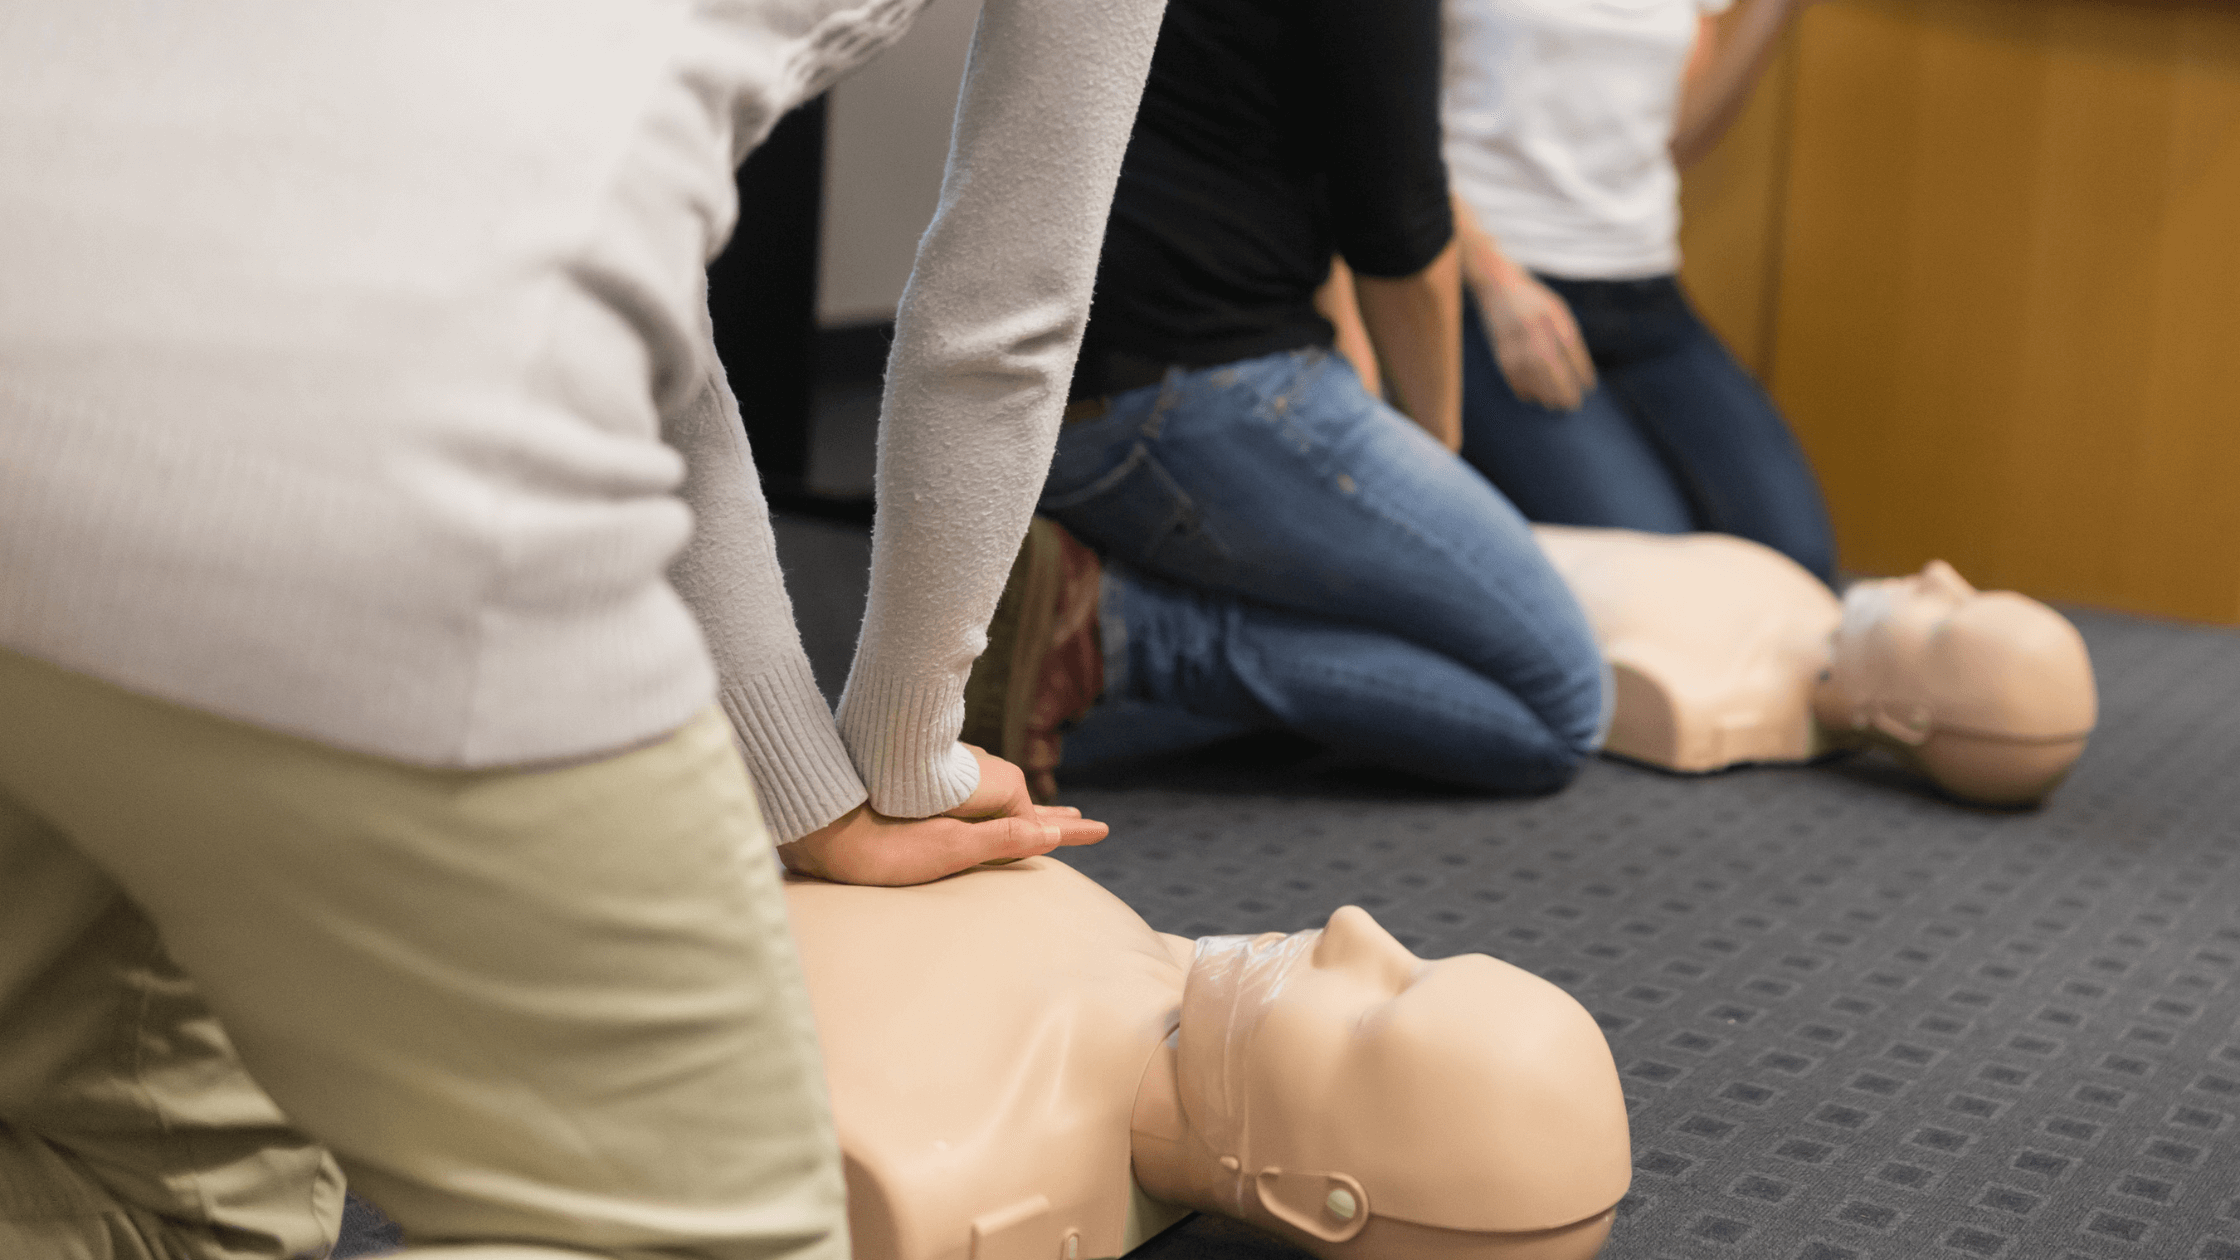 Learners practicing First Aid on CPR dolls